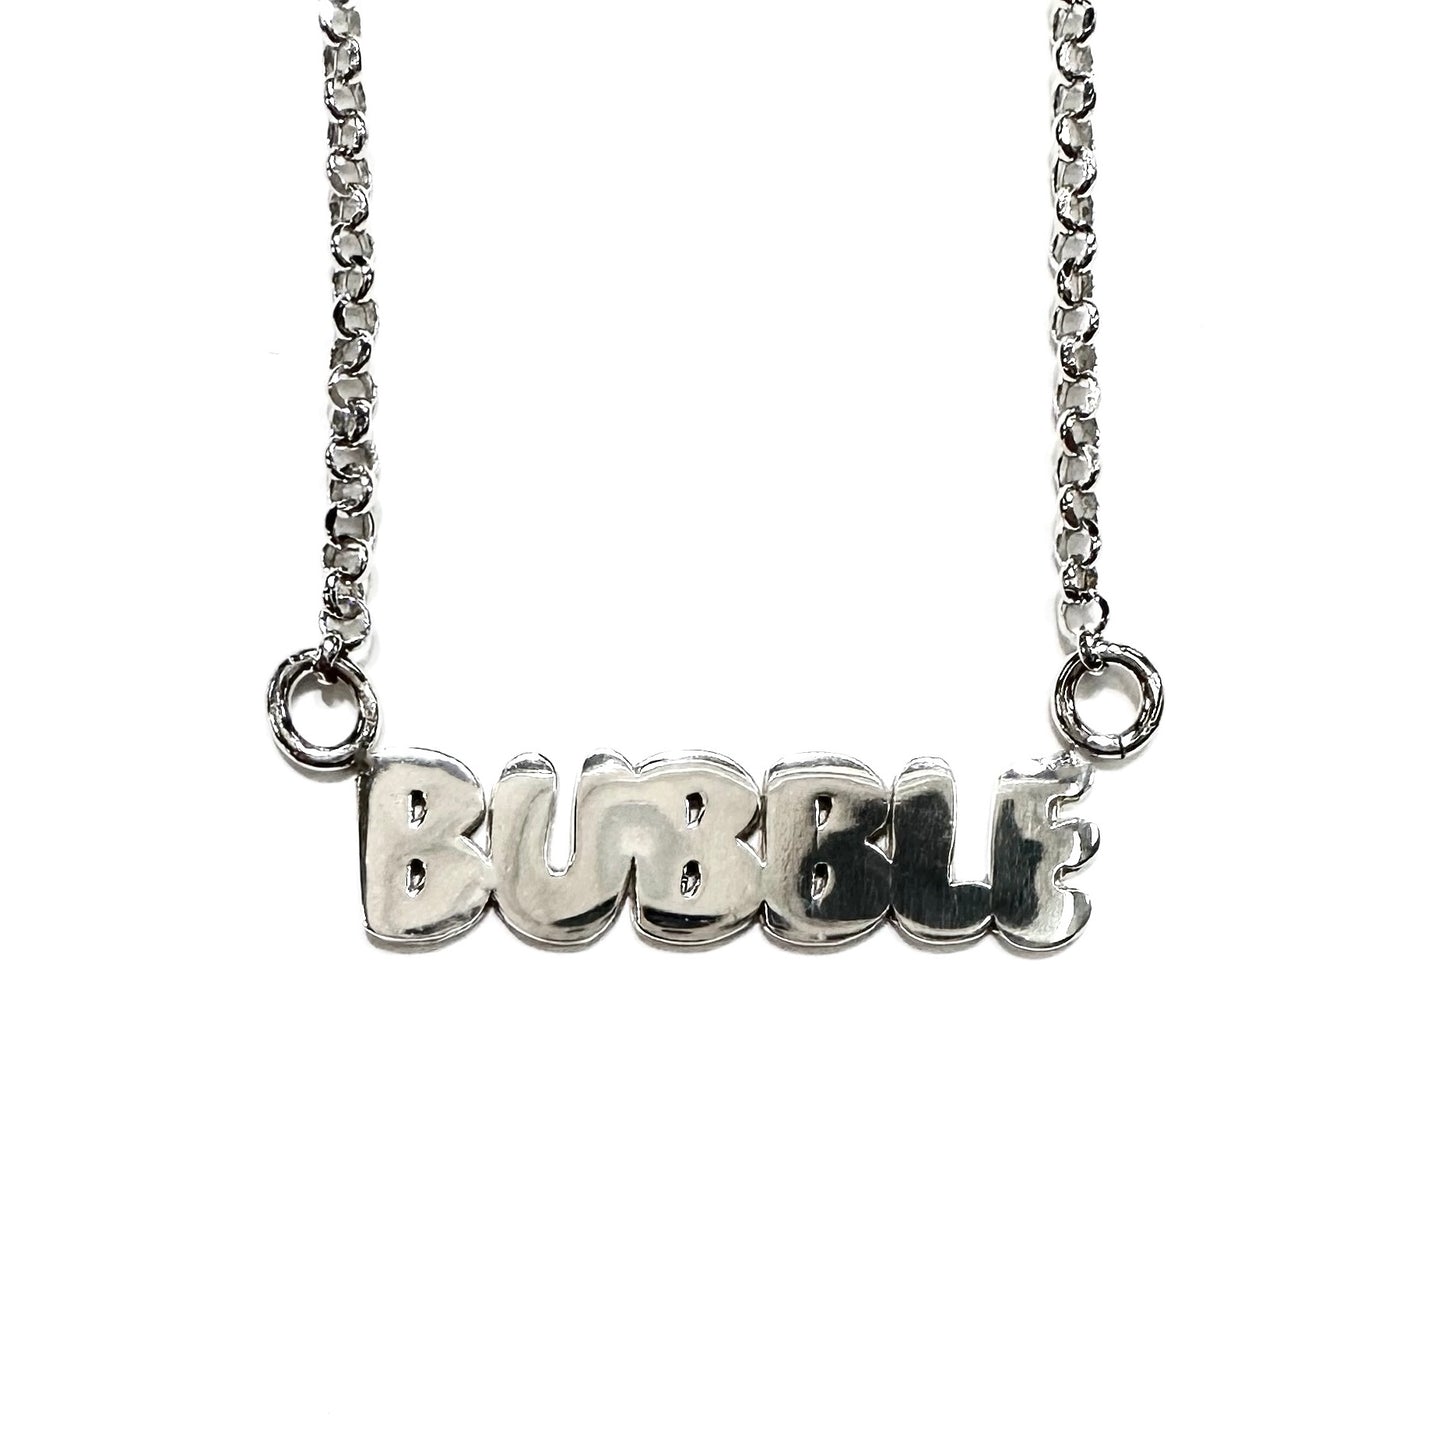 Custom Name Necklace: Bubble